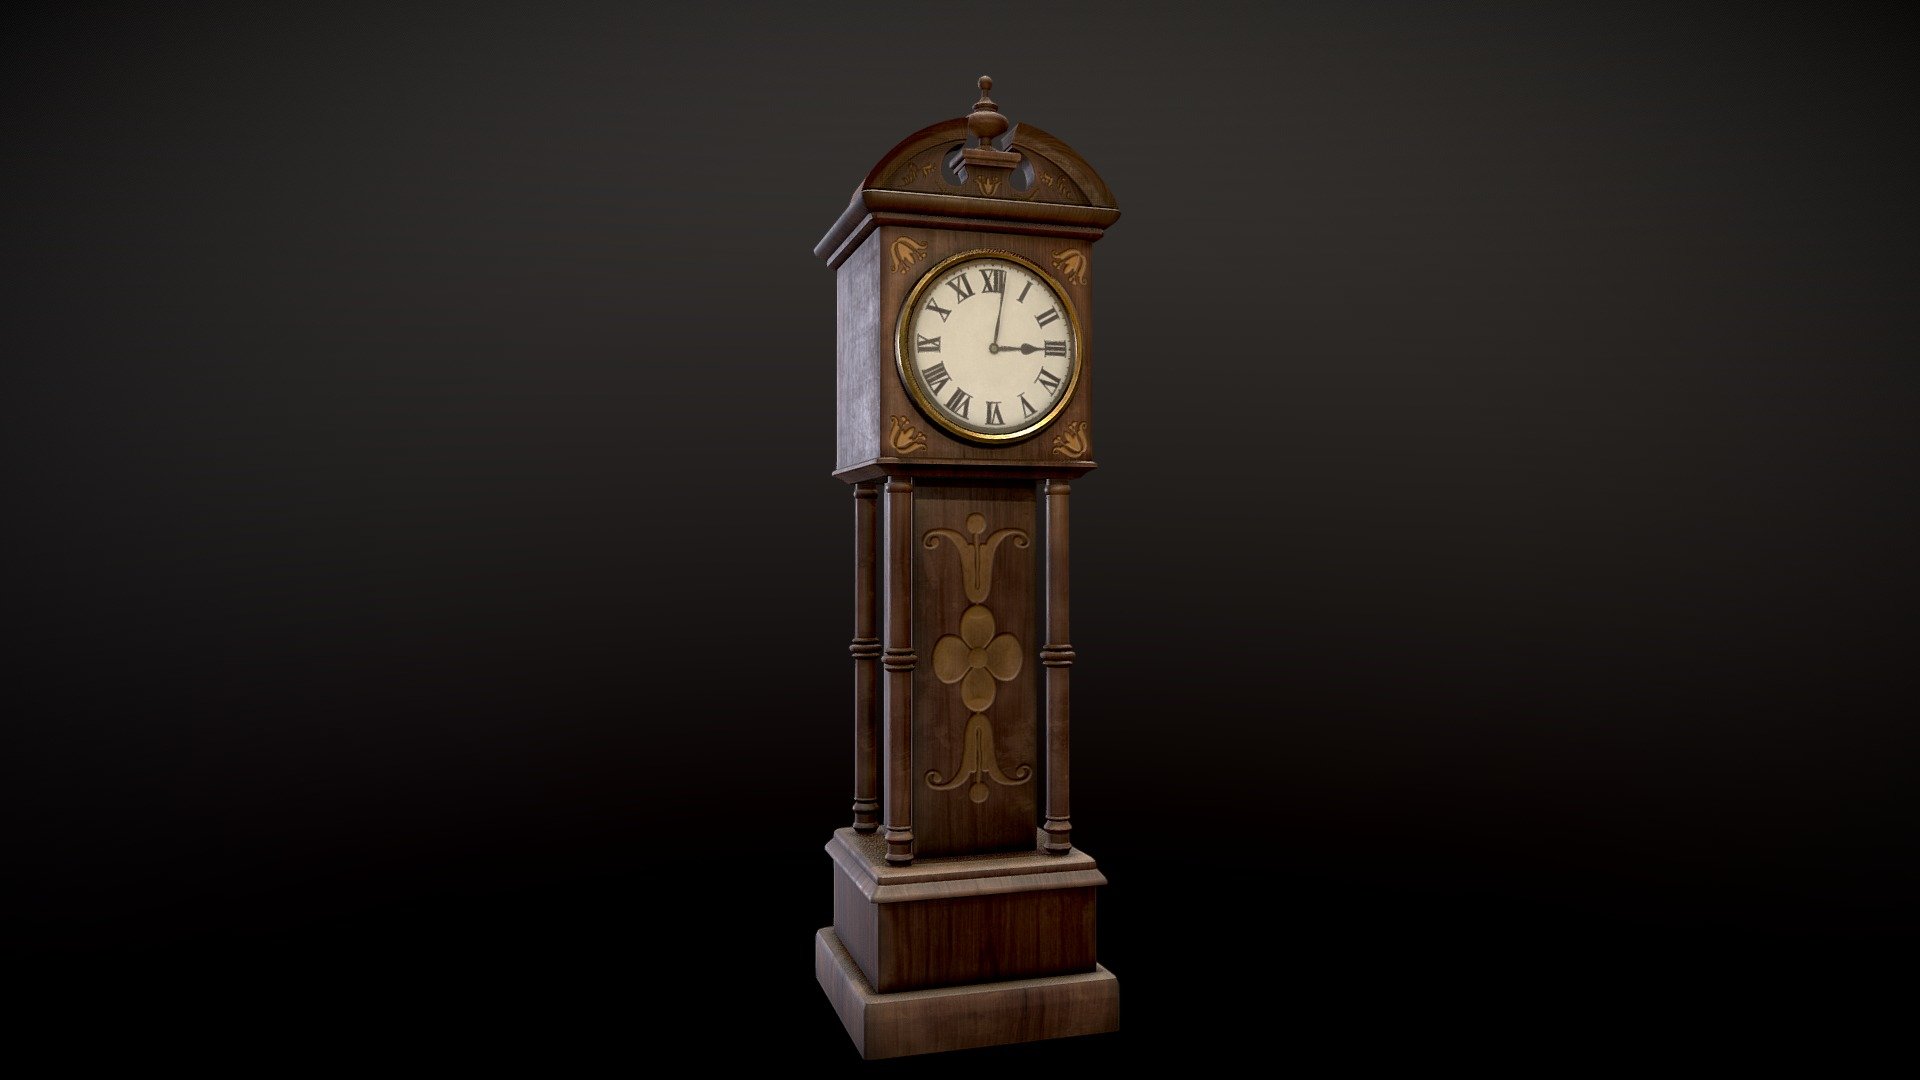 Old victorian style clock.
4k PBR textures 3d model